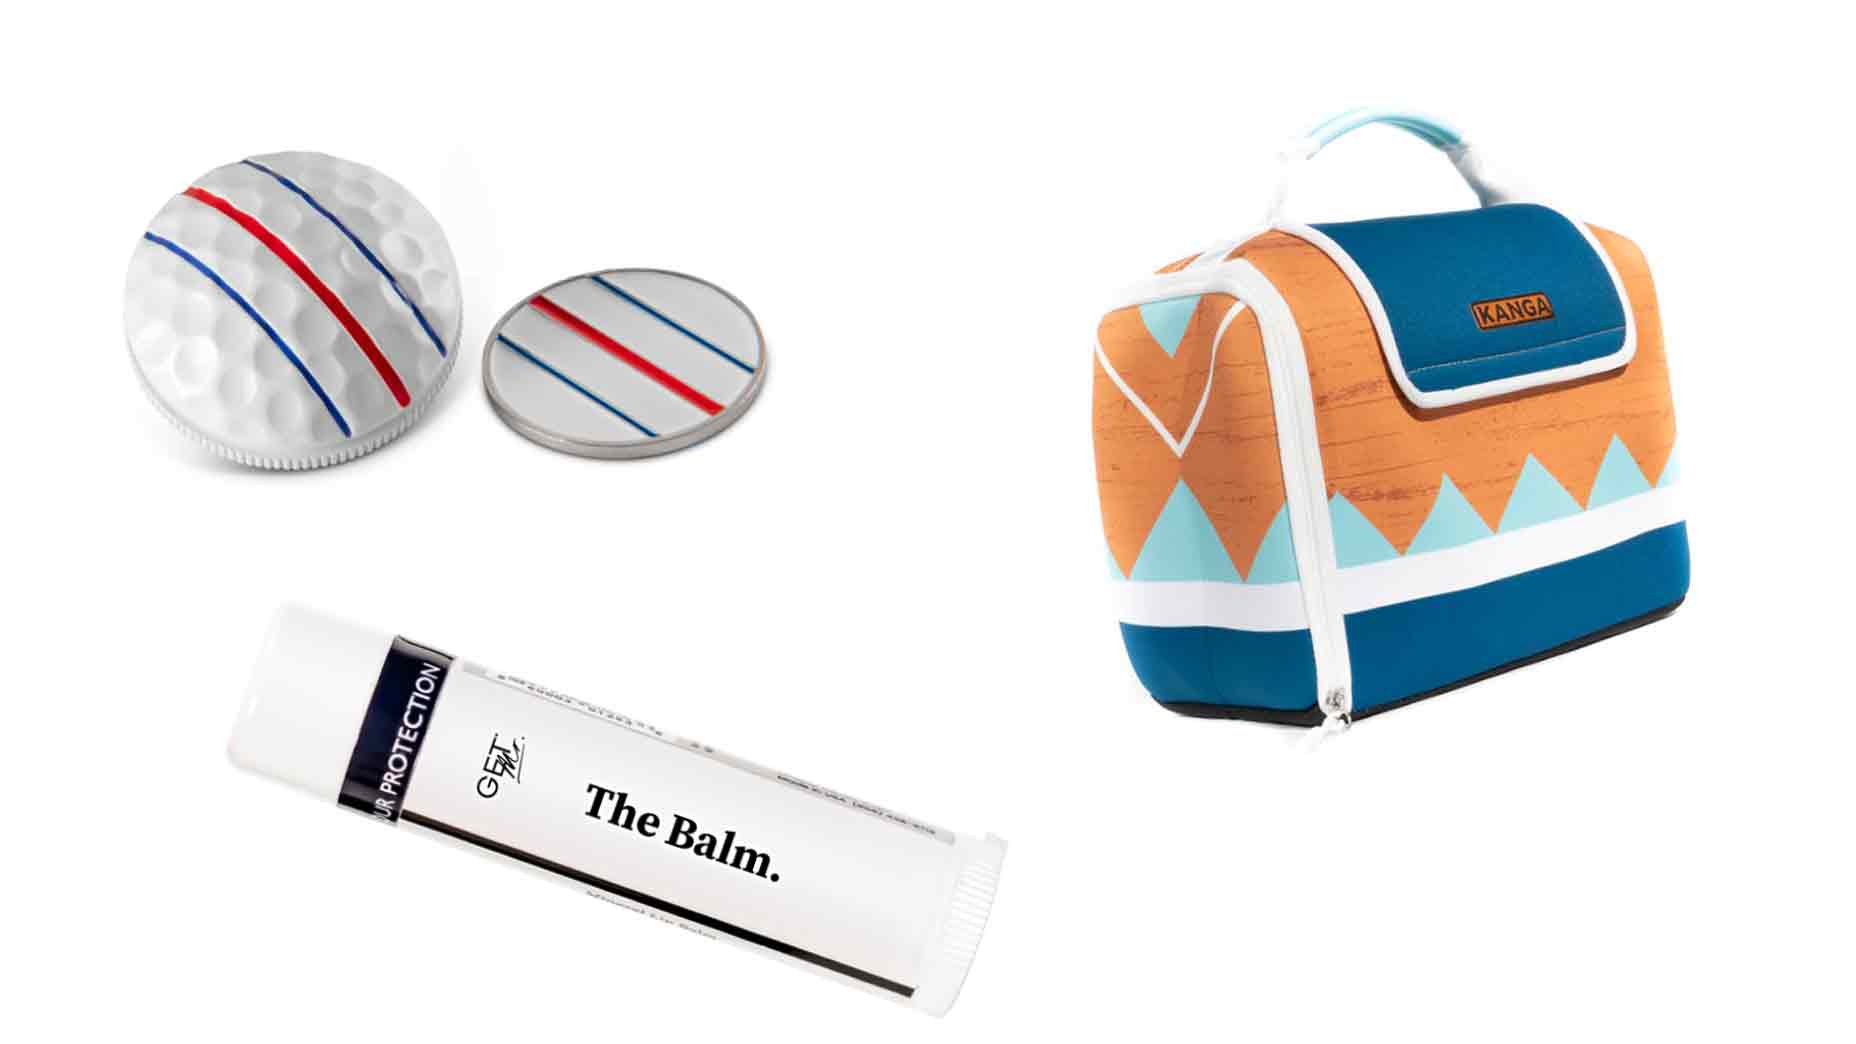 These 5 golf accessories will make your life so much easier